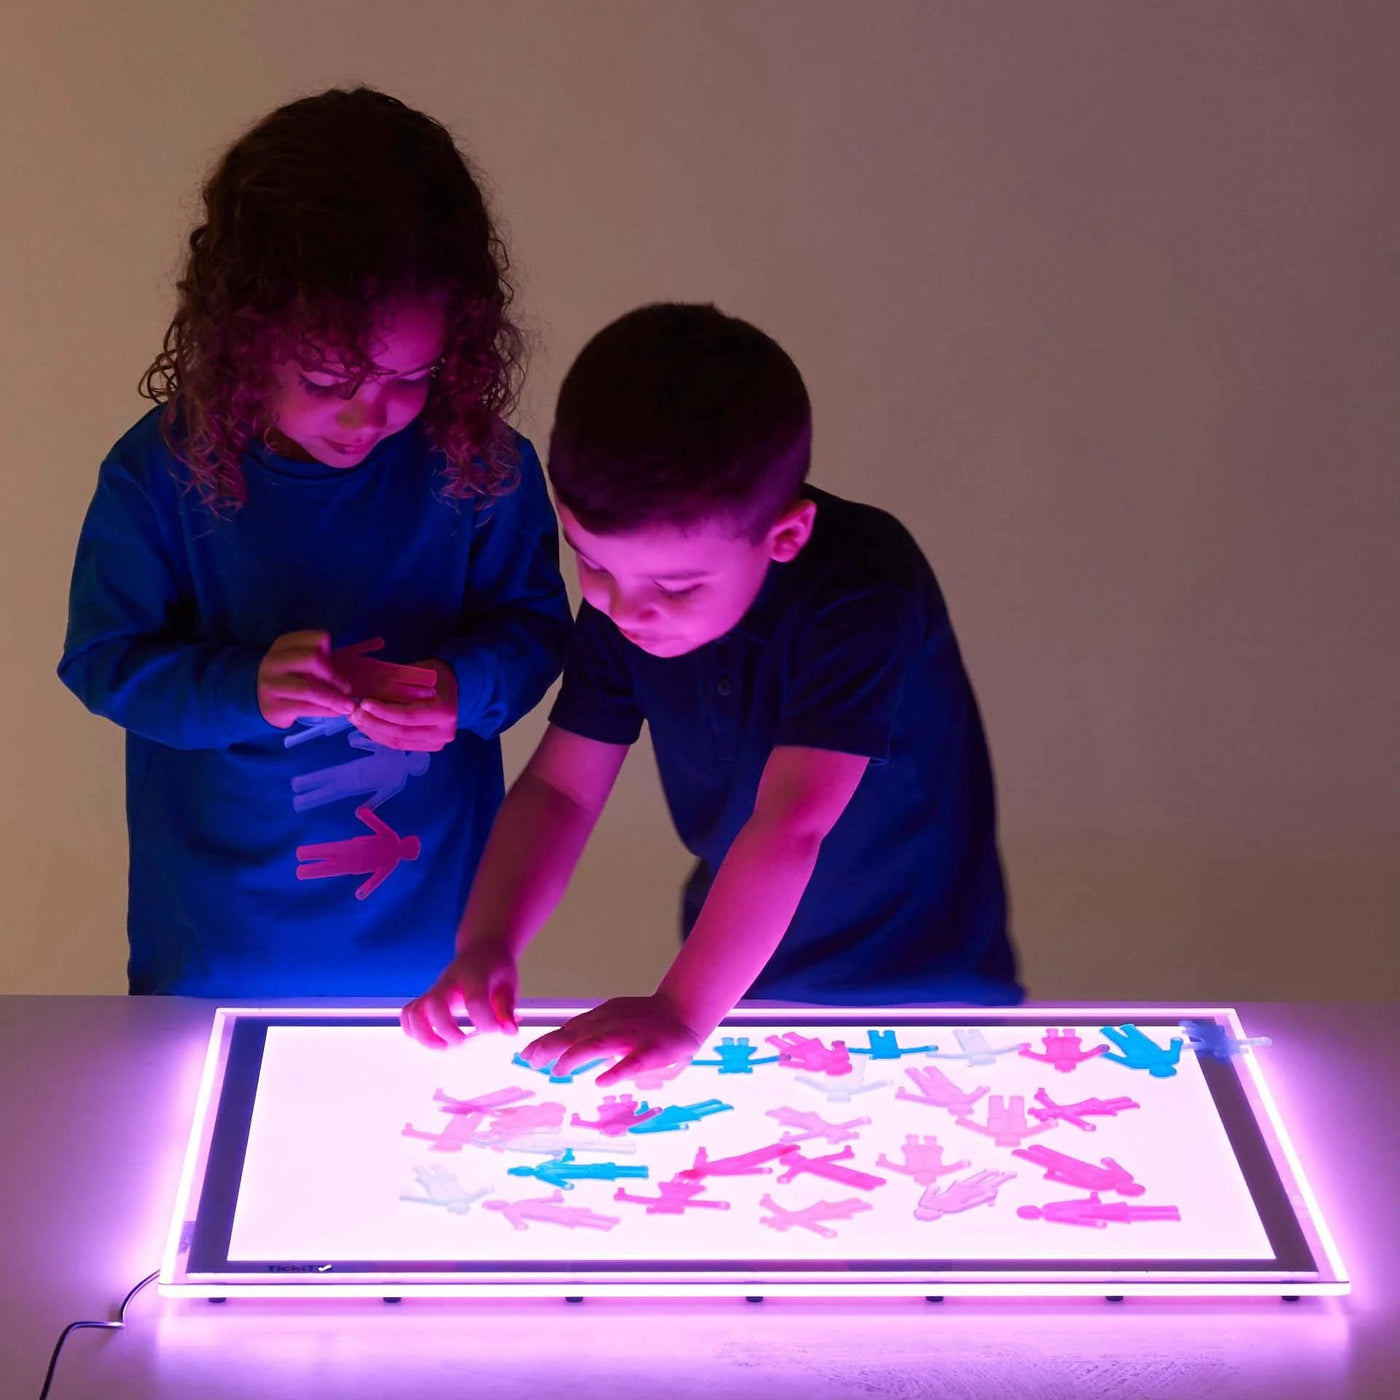 A2 Colour Changing Light Panel-Light Panels-TickiT-Yes Bebe